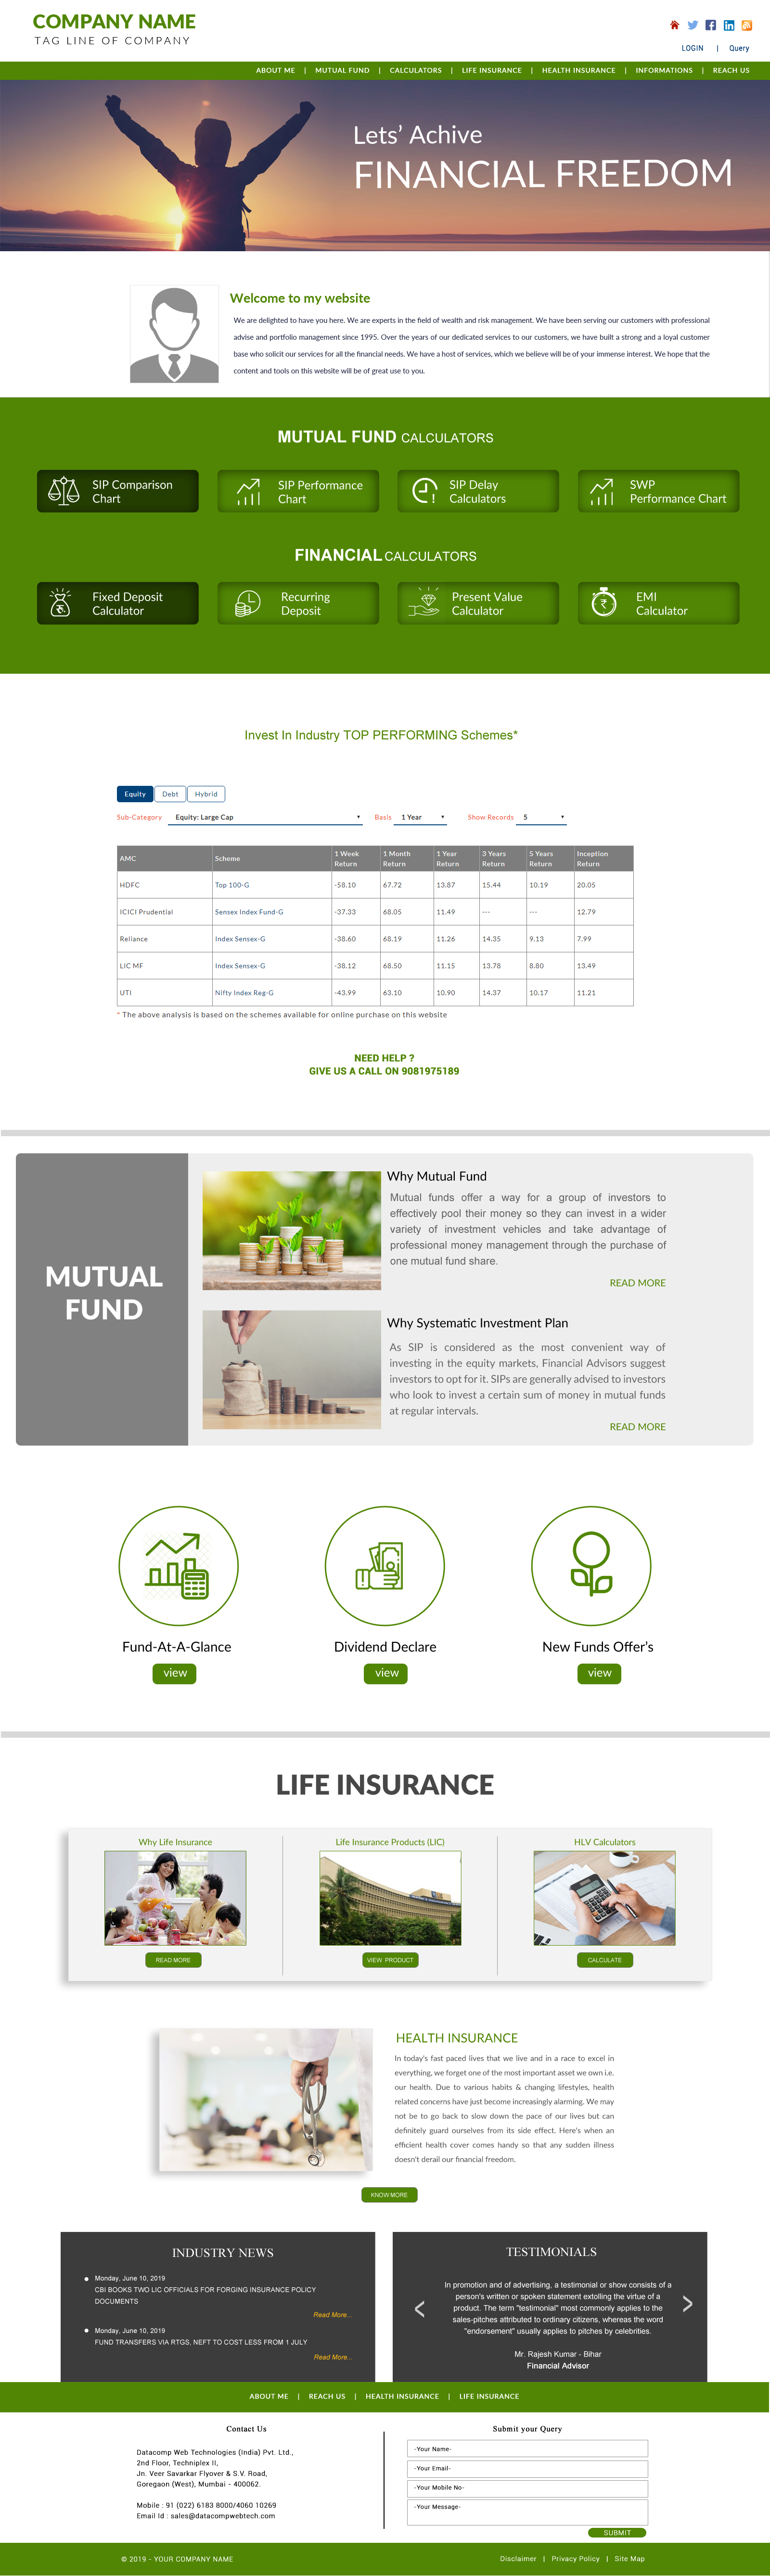 ECR Wealth Quick Silver template image for selection